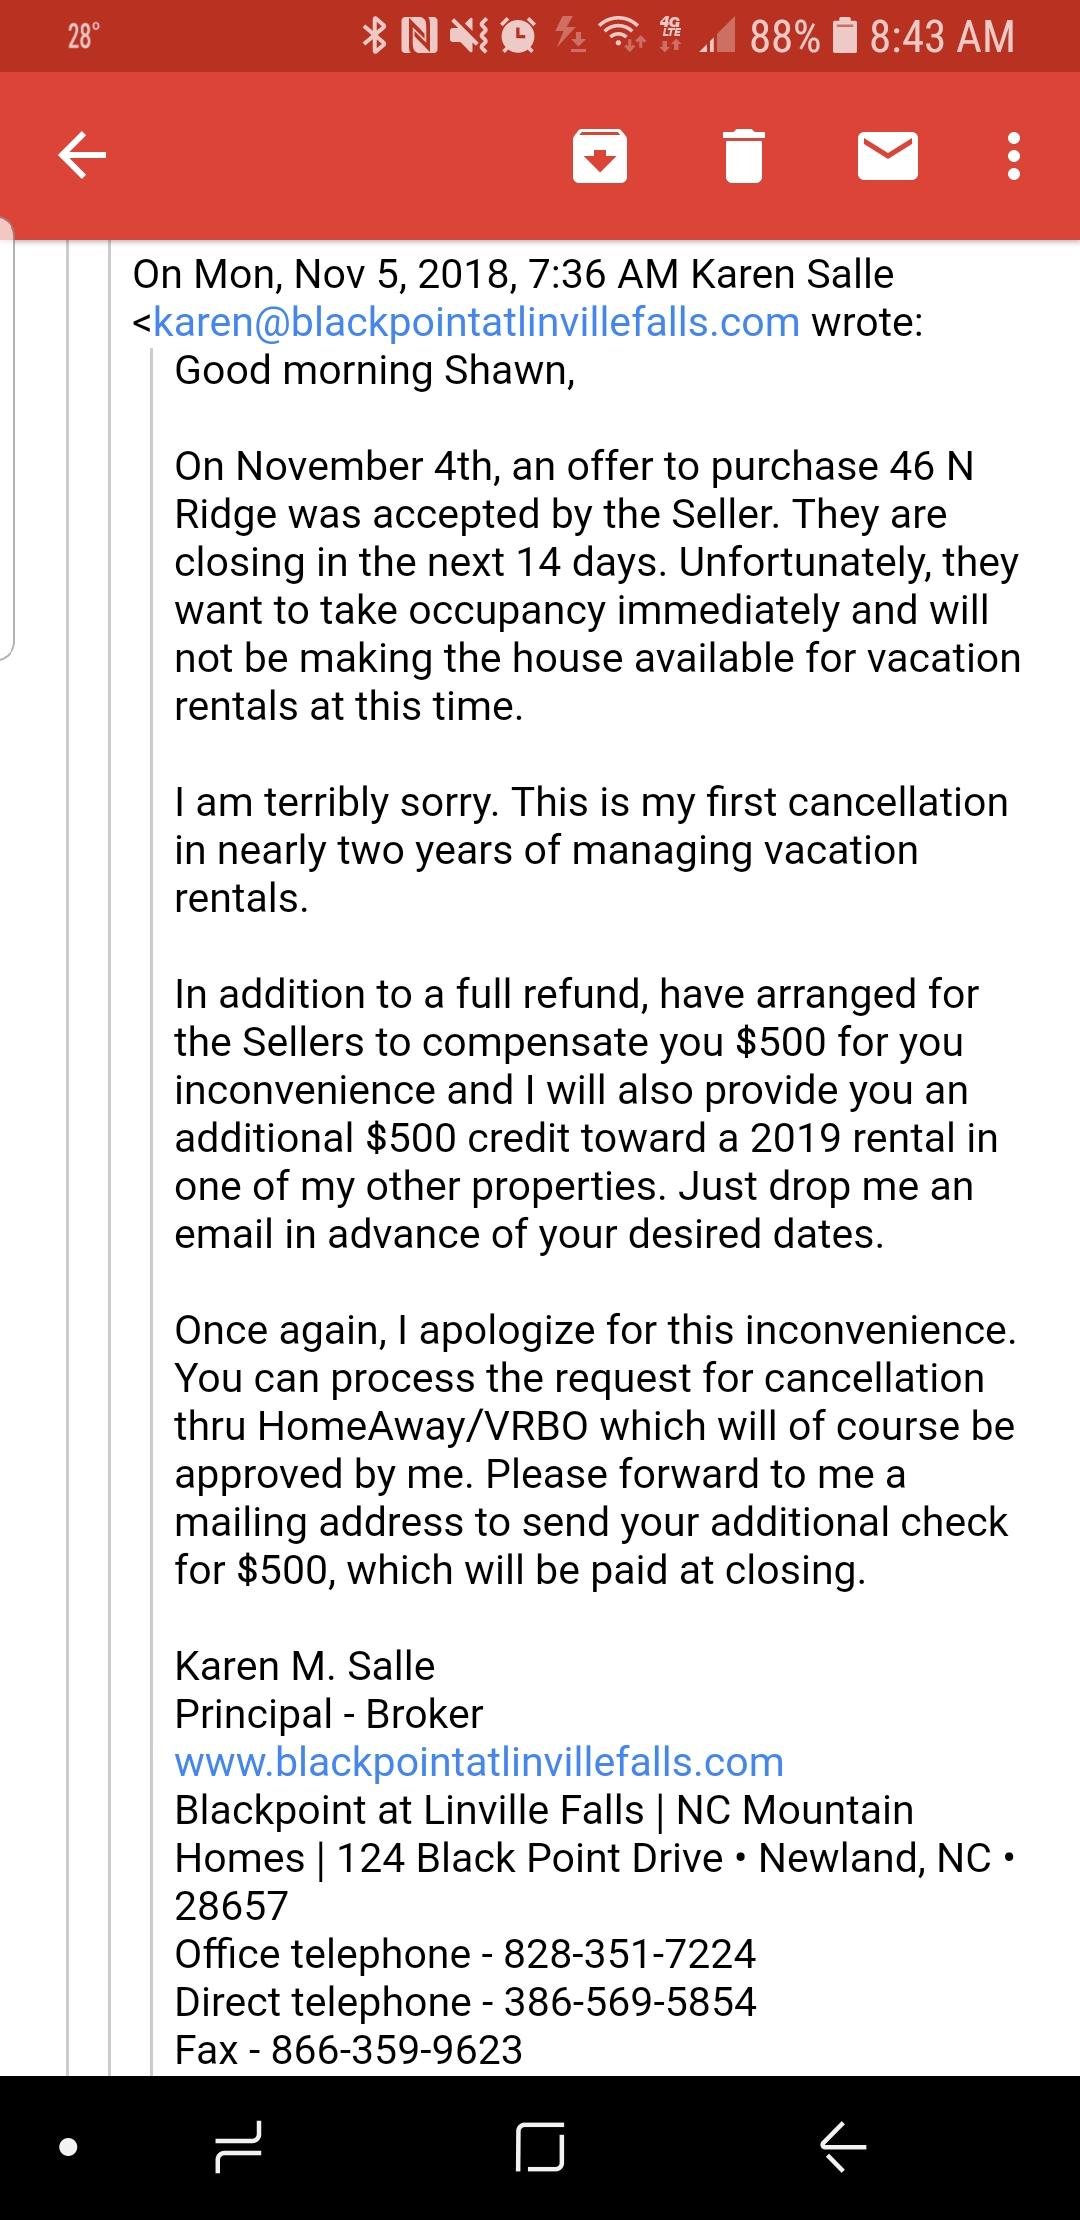 The email I received when she cancelled my reserva